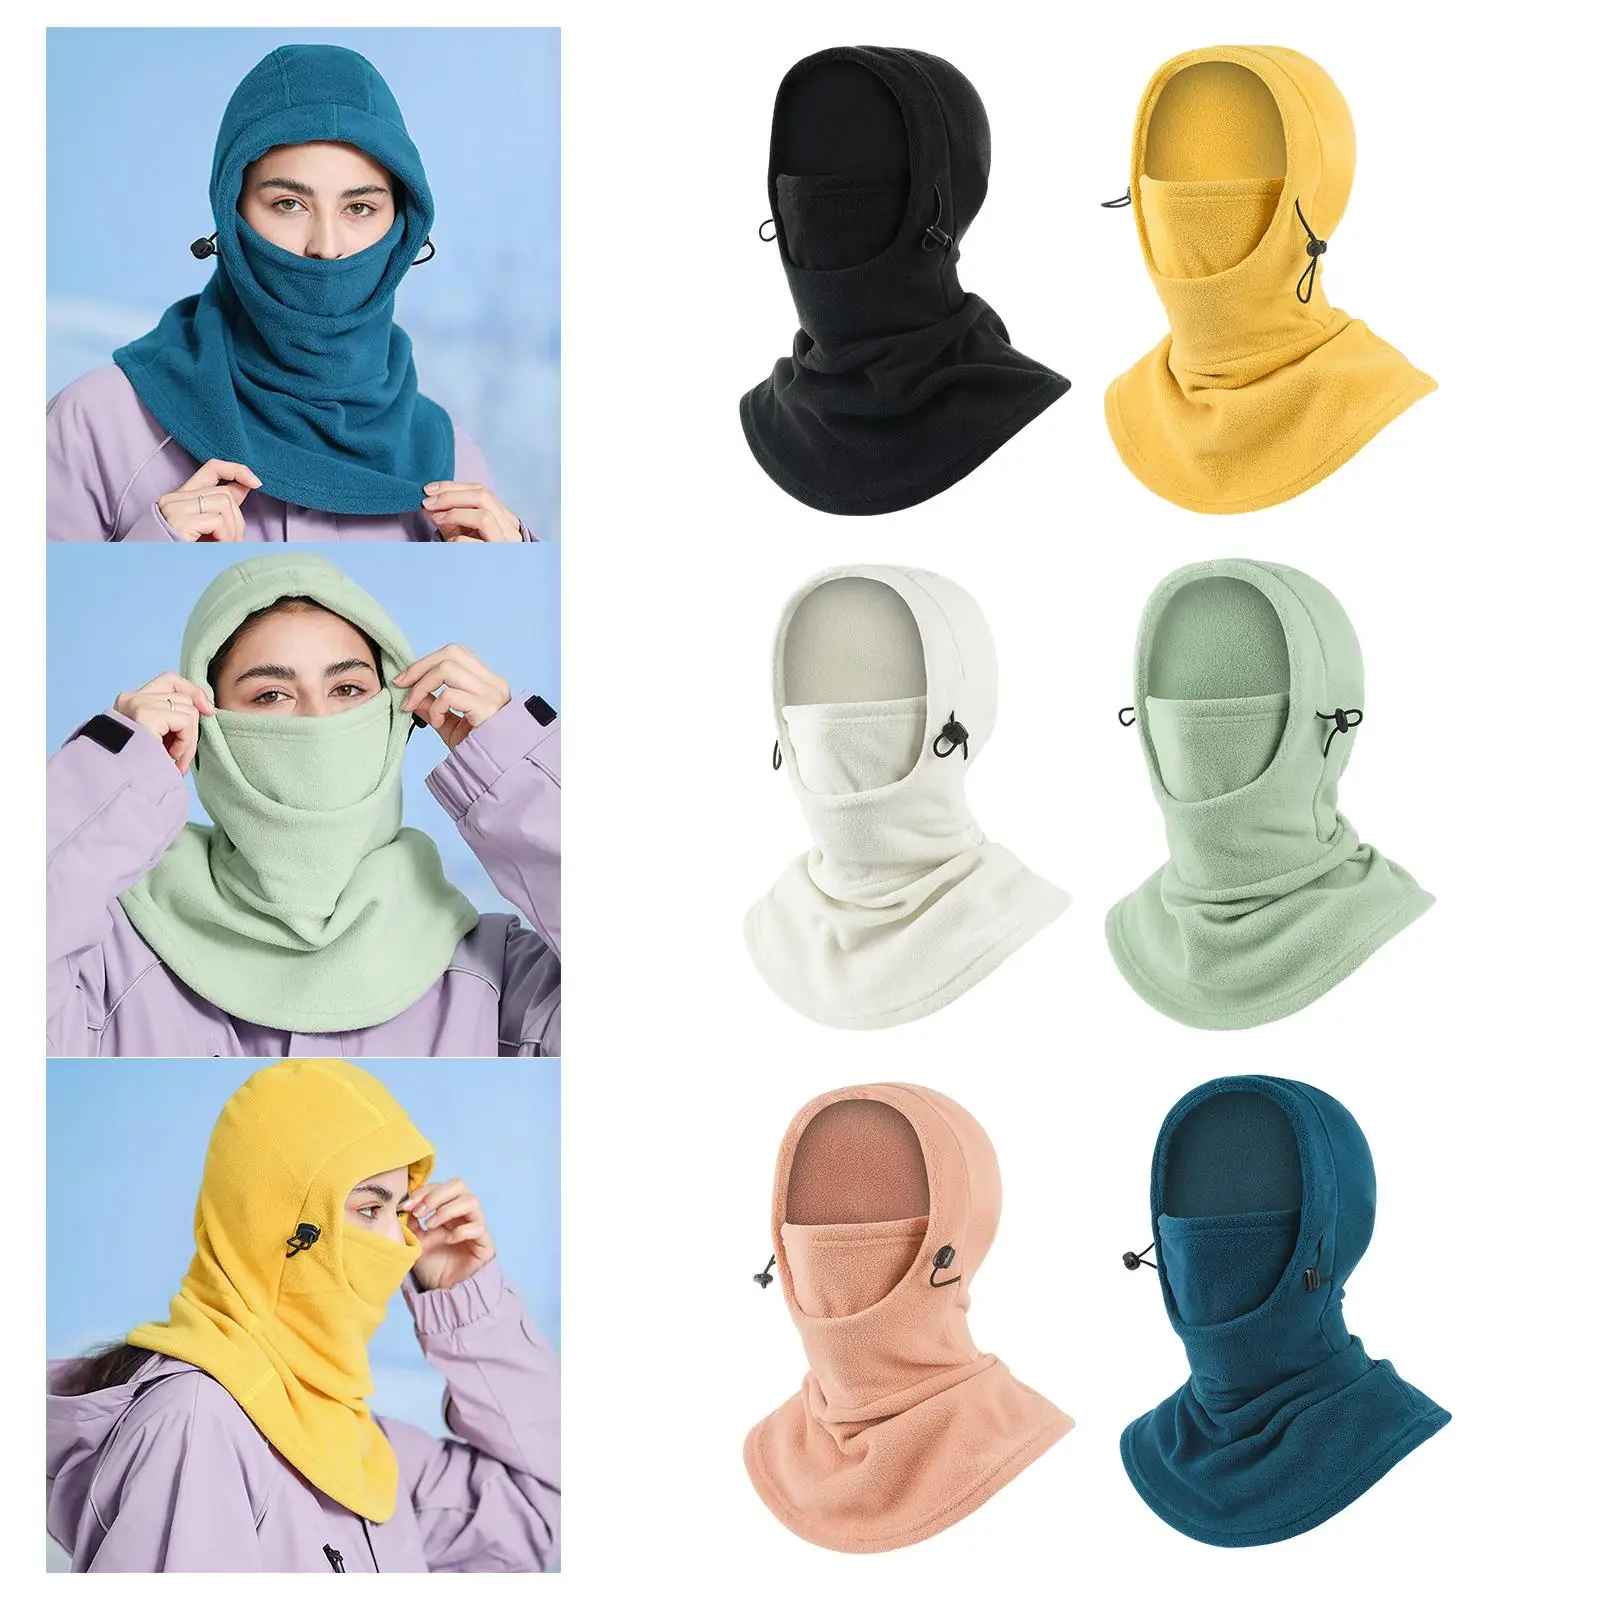 Thermal Fleece Balaclava Hat Hooded Neck Warmer Cycling Face Mask Outdoor Winter Skiing Sport Face Mask Men Cycling Masked Caps